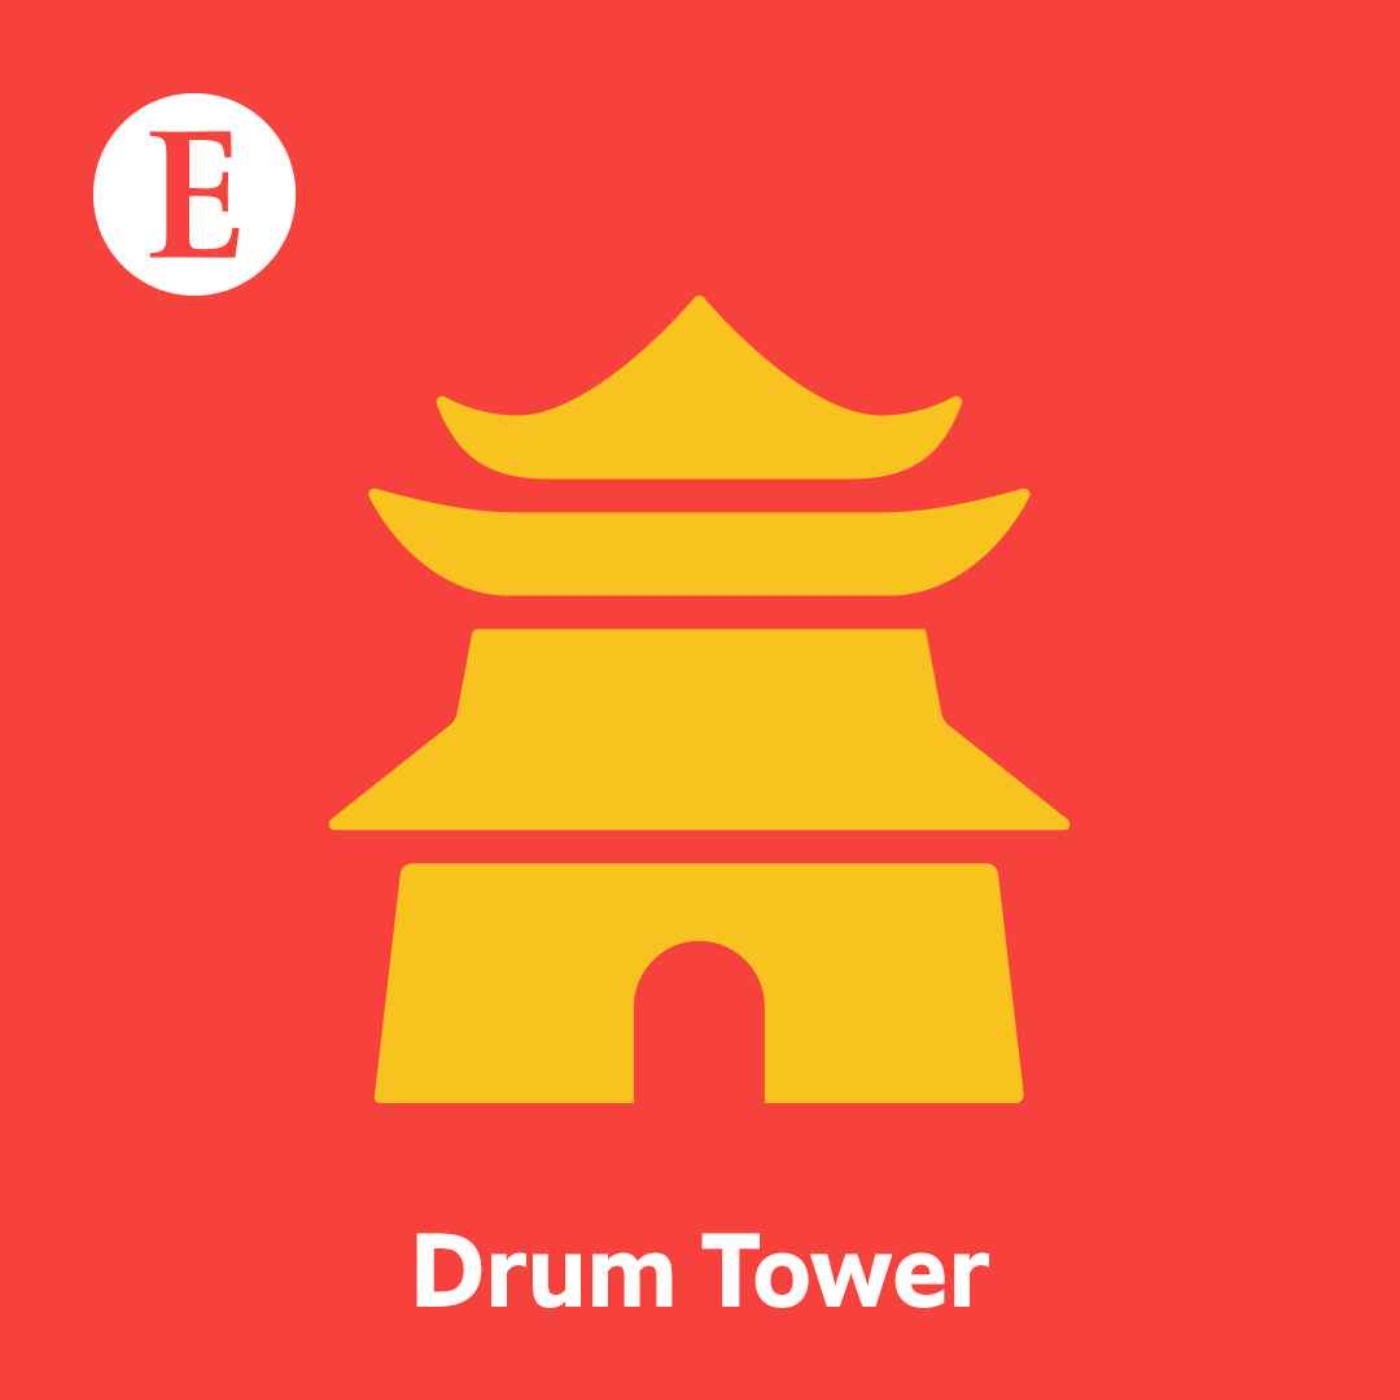 Drum Tower: Cash into their chips